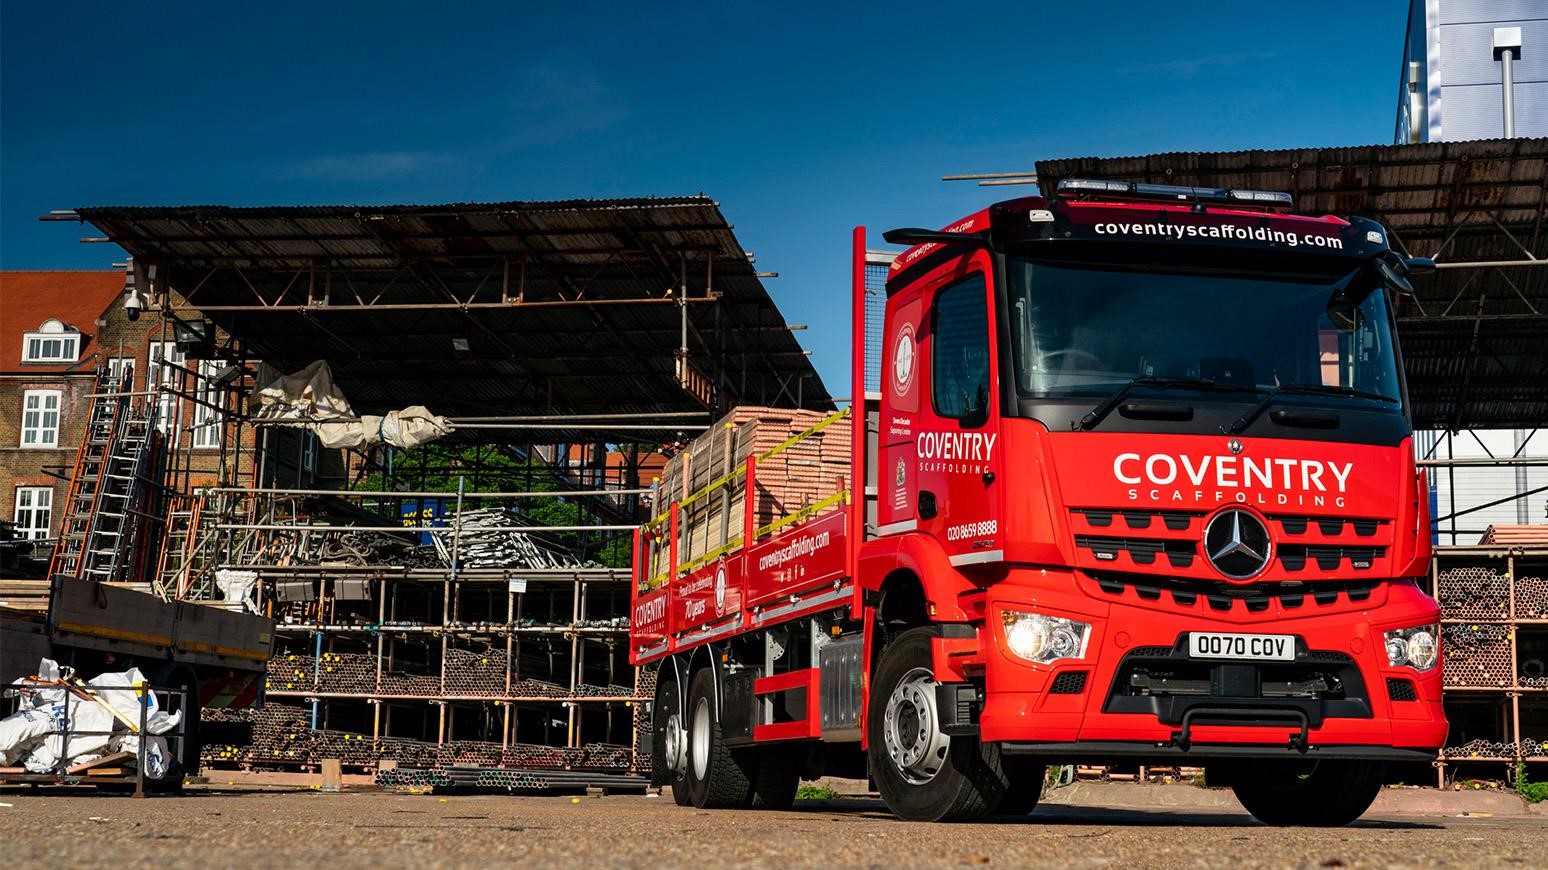 Coventry Scaffolding Buys Its First Mercedes-Benz Truck, Quickly Orders A Second